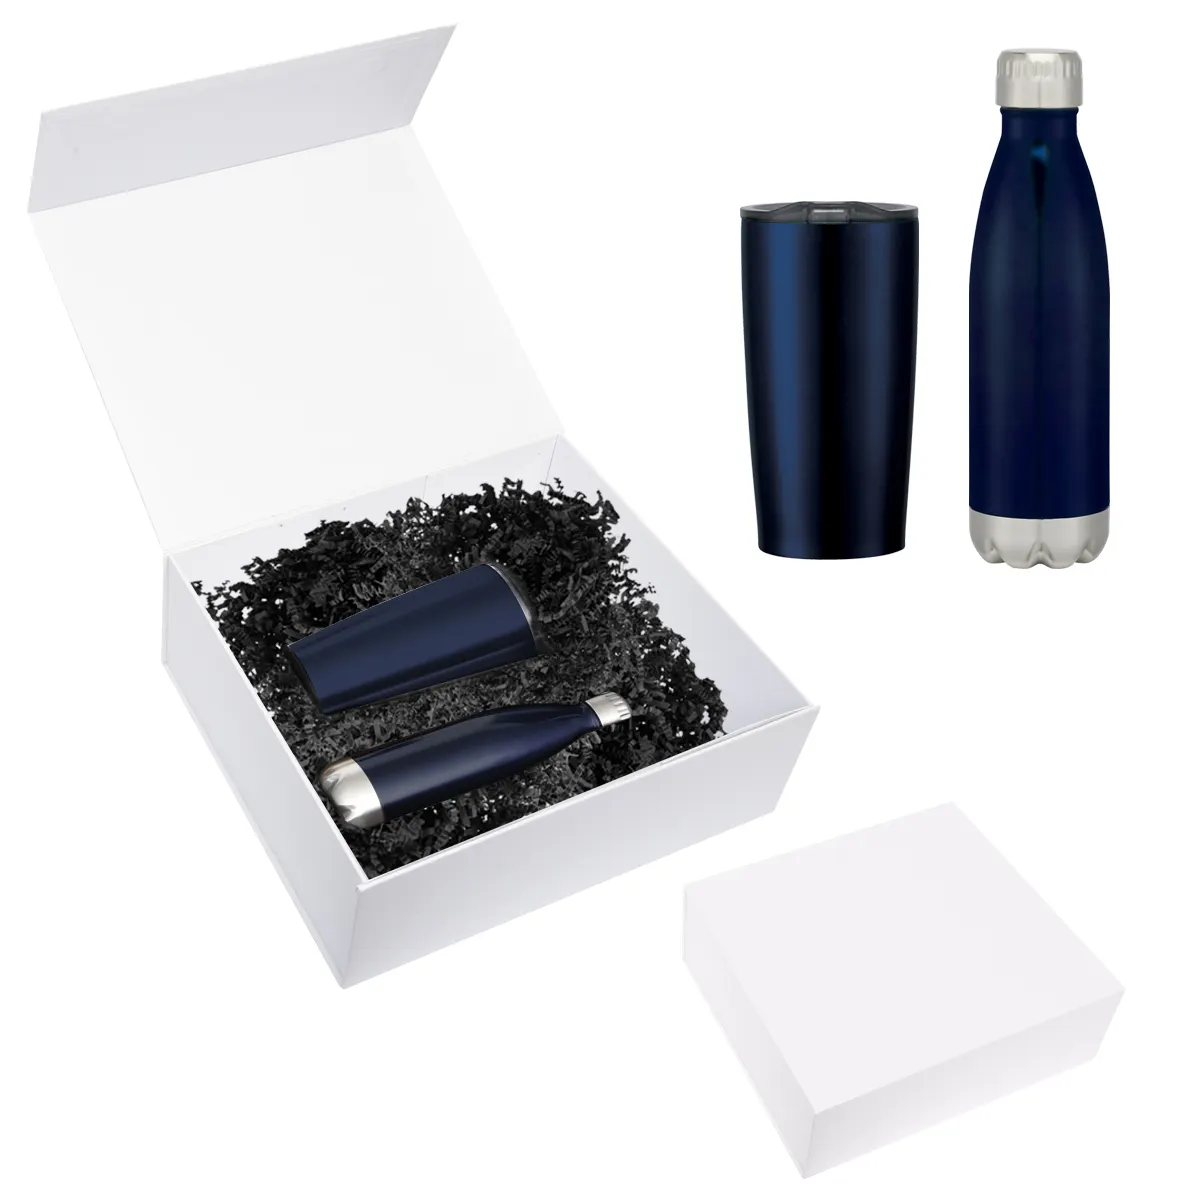 Promotional Products Items Gift Sets Highest Quality Tumbler For Men Women Christmas Gifts With Gift Box Decoration